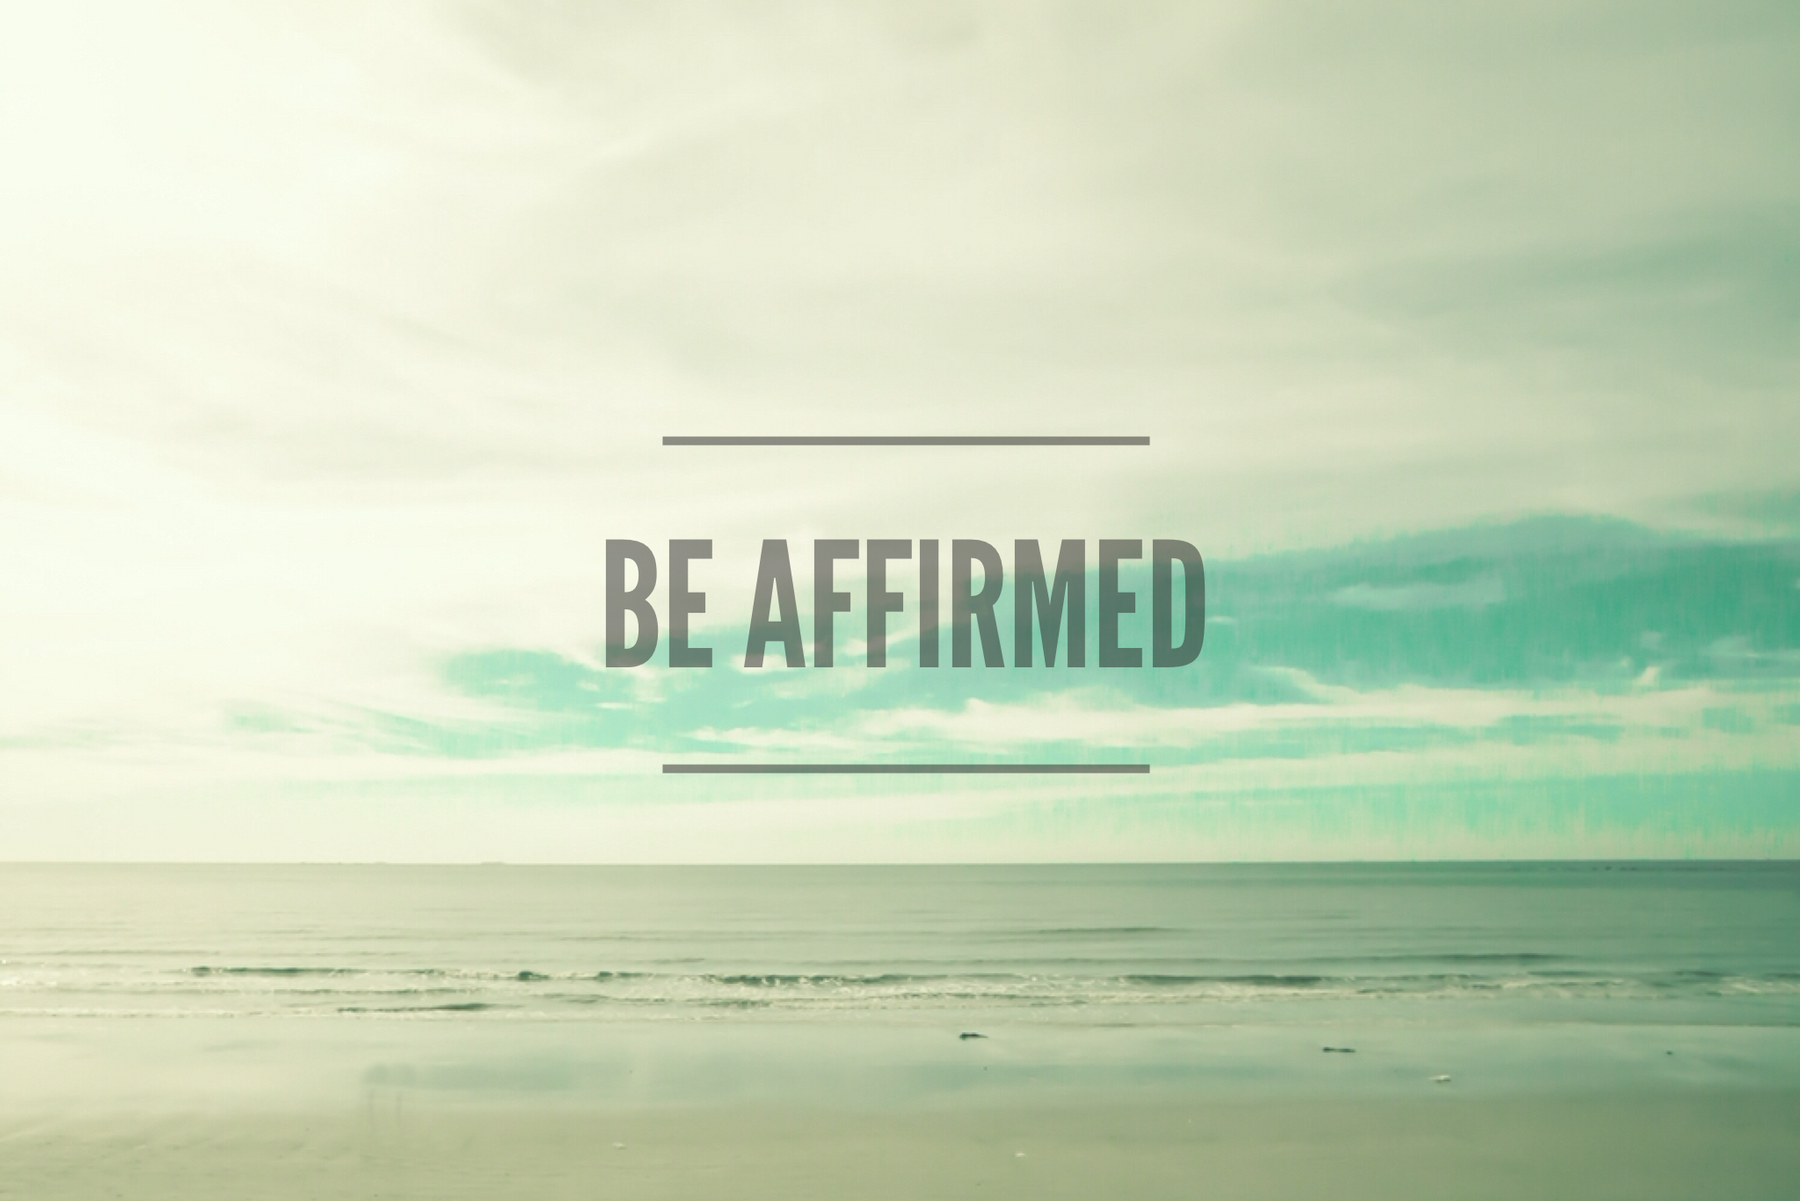 Your Affirmation Comes From God